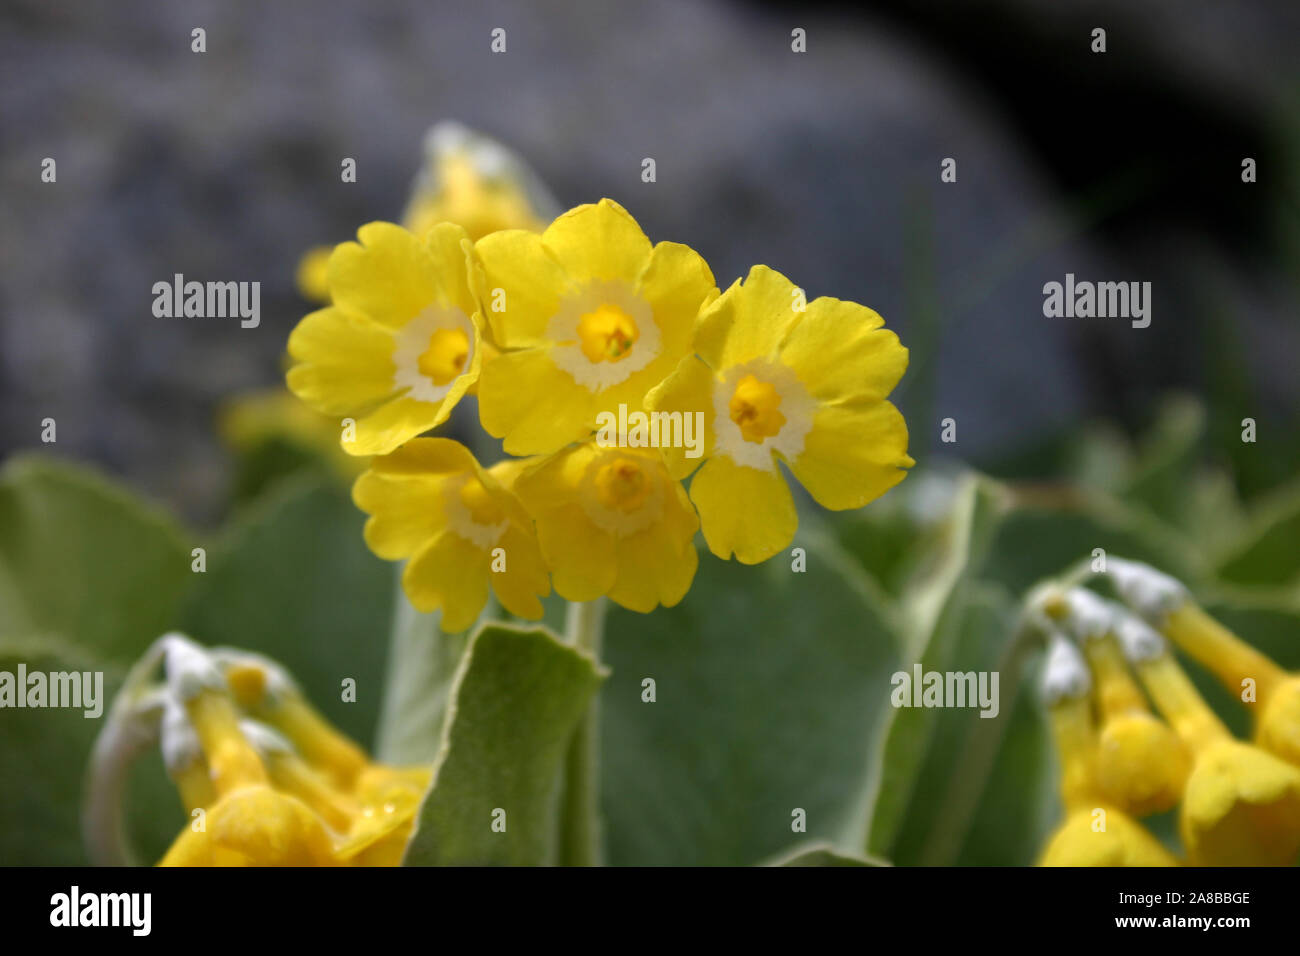 Primula auricula (commonly known as auricula, mountain cowslip or bear's ear). Stock Photo